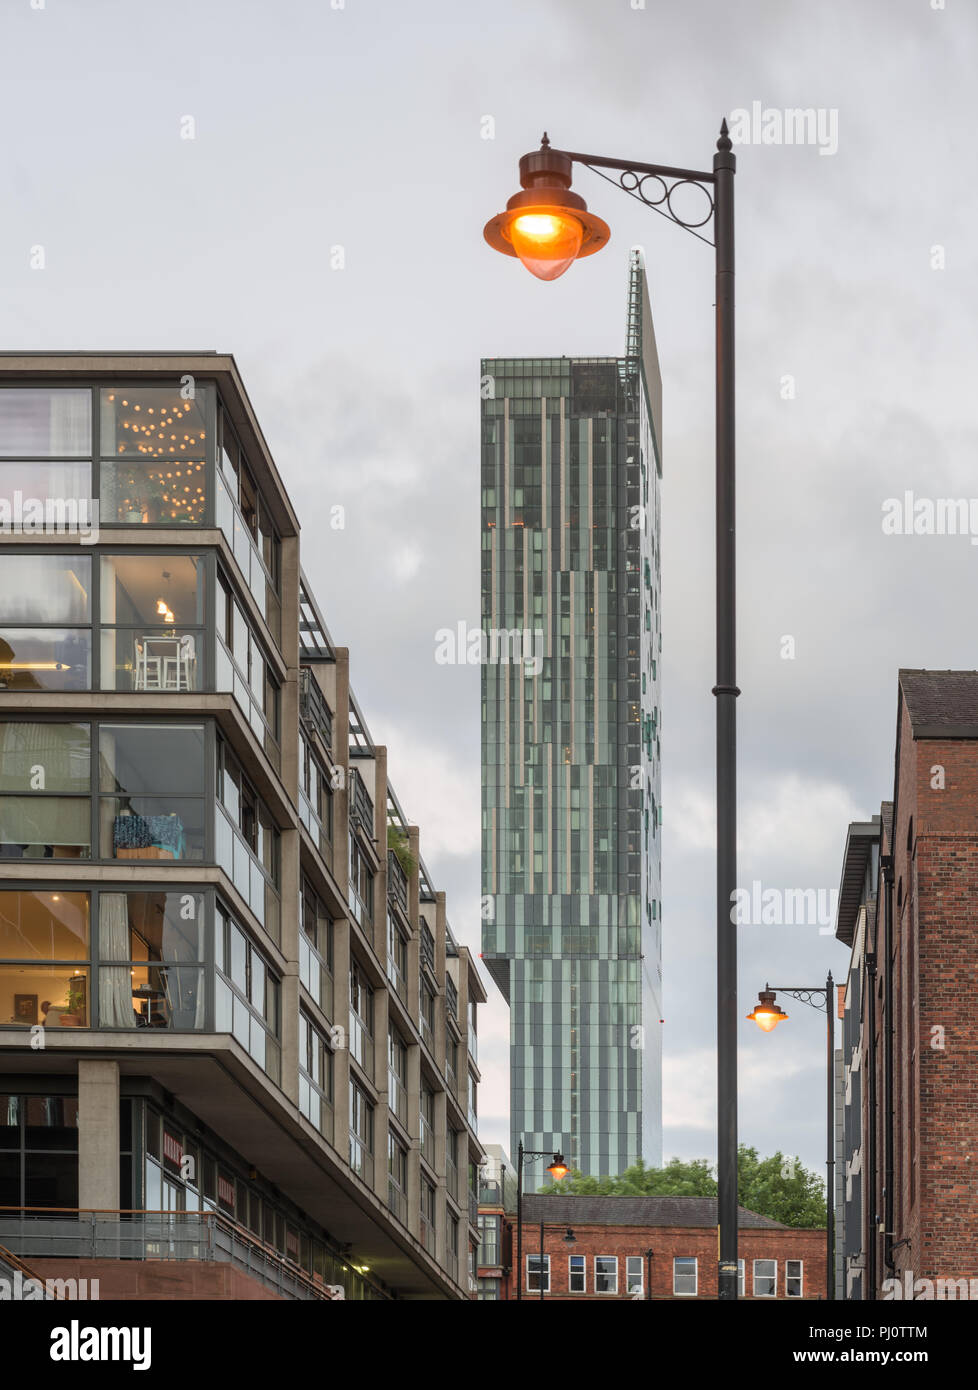 Portrait of the Hilton Hotel (Beetham Tower) from a low viewpoint showing an illuminated lamp post above the hotel Stock Photo